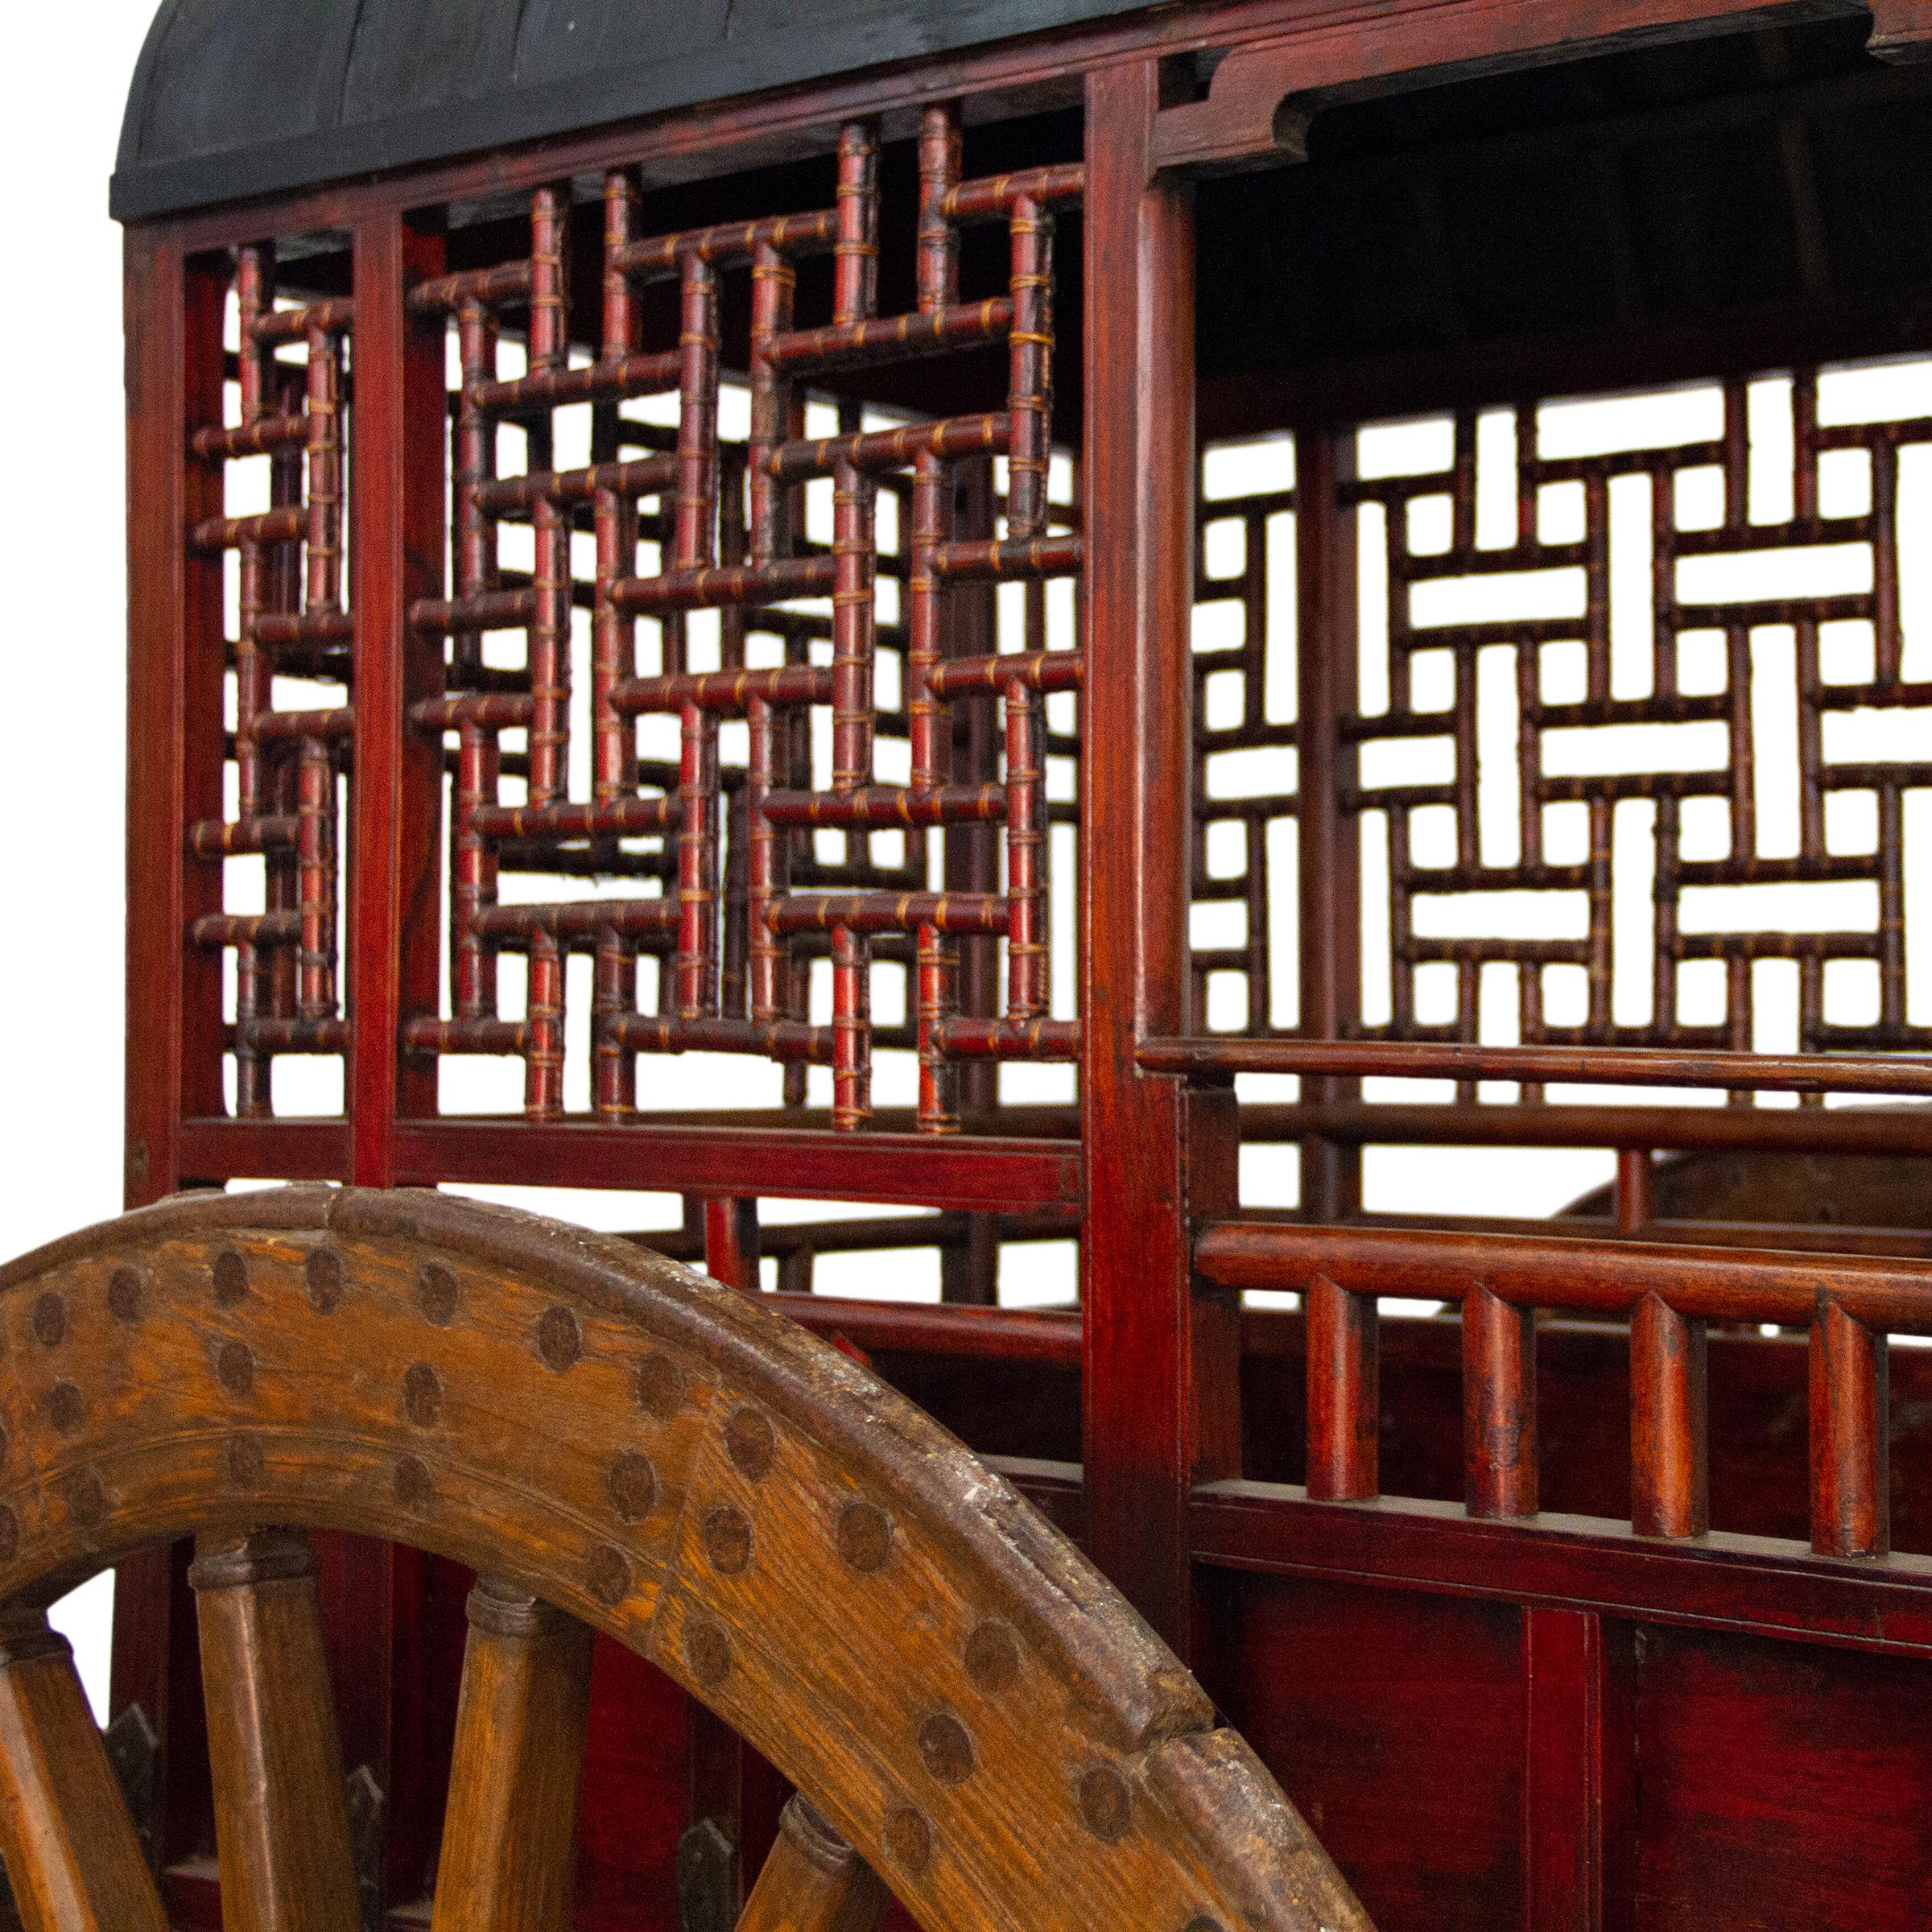 Remarkably well-preserved, this 19th-century covered ox cart is an exceptional example of the preferred mode of transportation by the Qing-dynasty elite. Gaining popularity in the late Han dynasty, oxen-drawn wagons such as this provided better